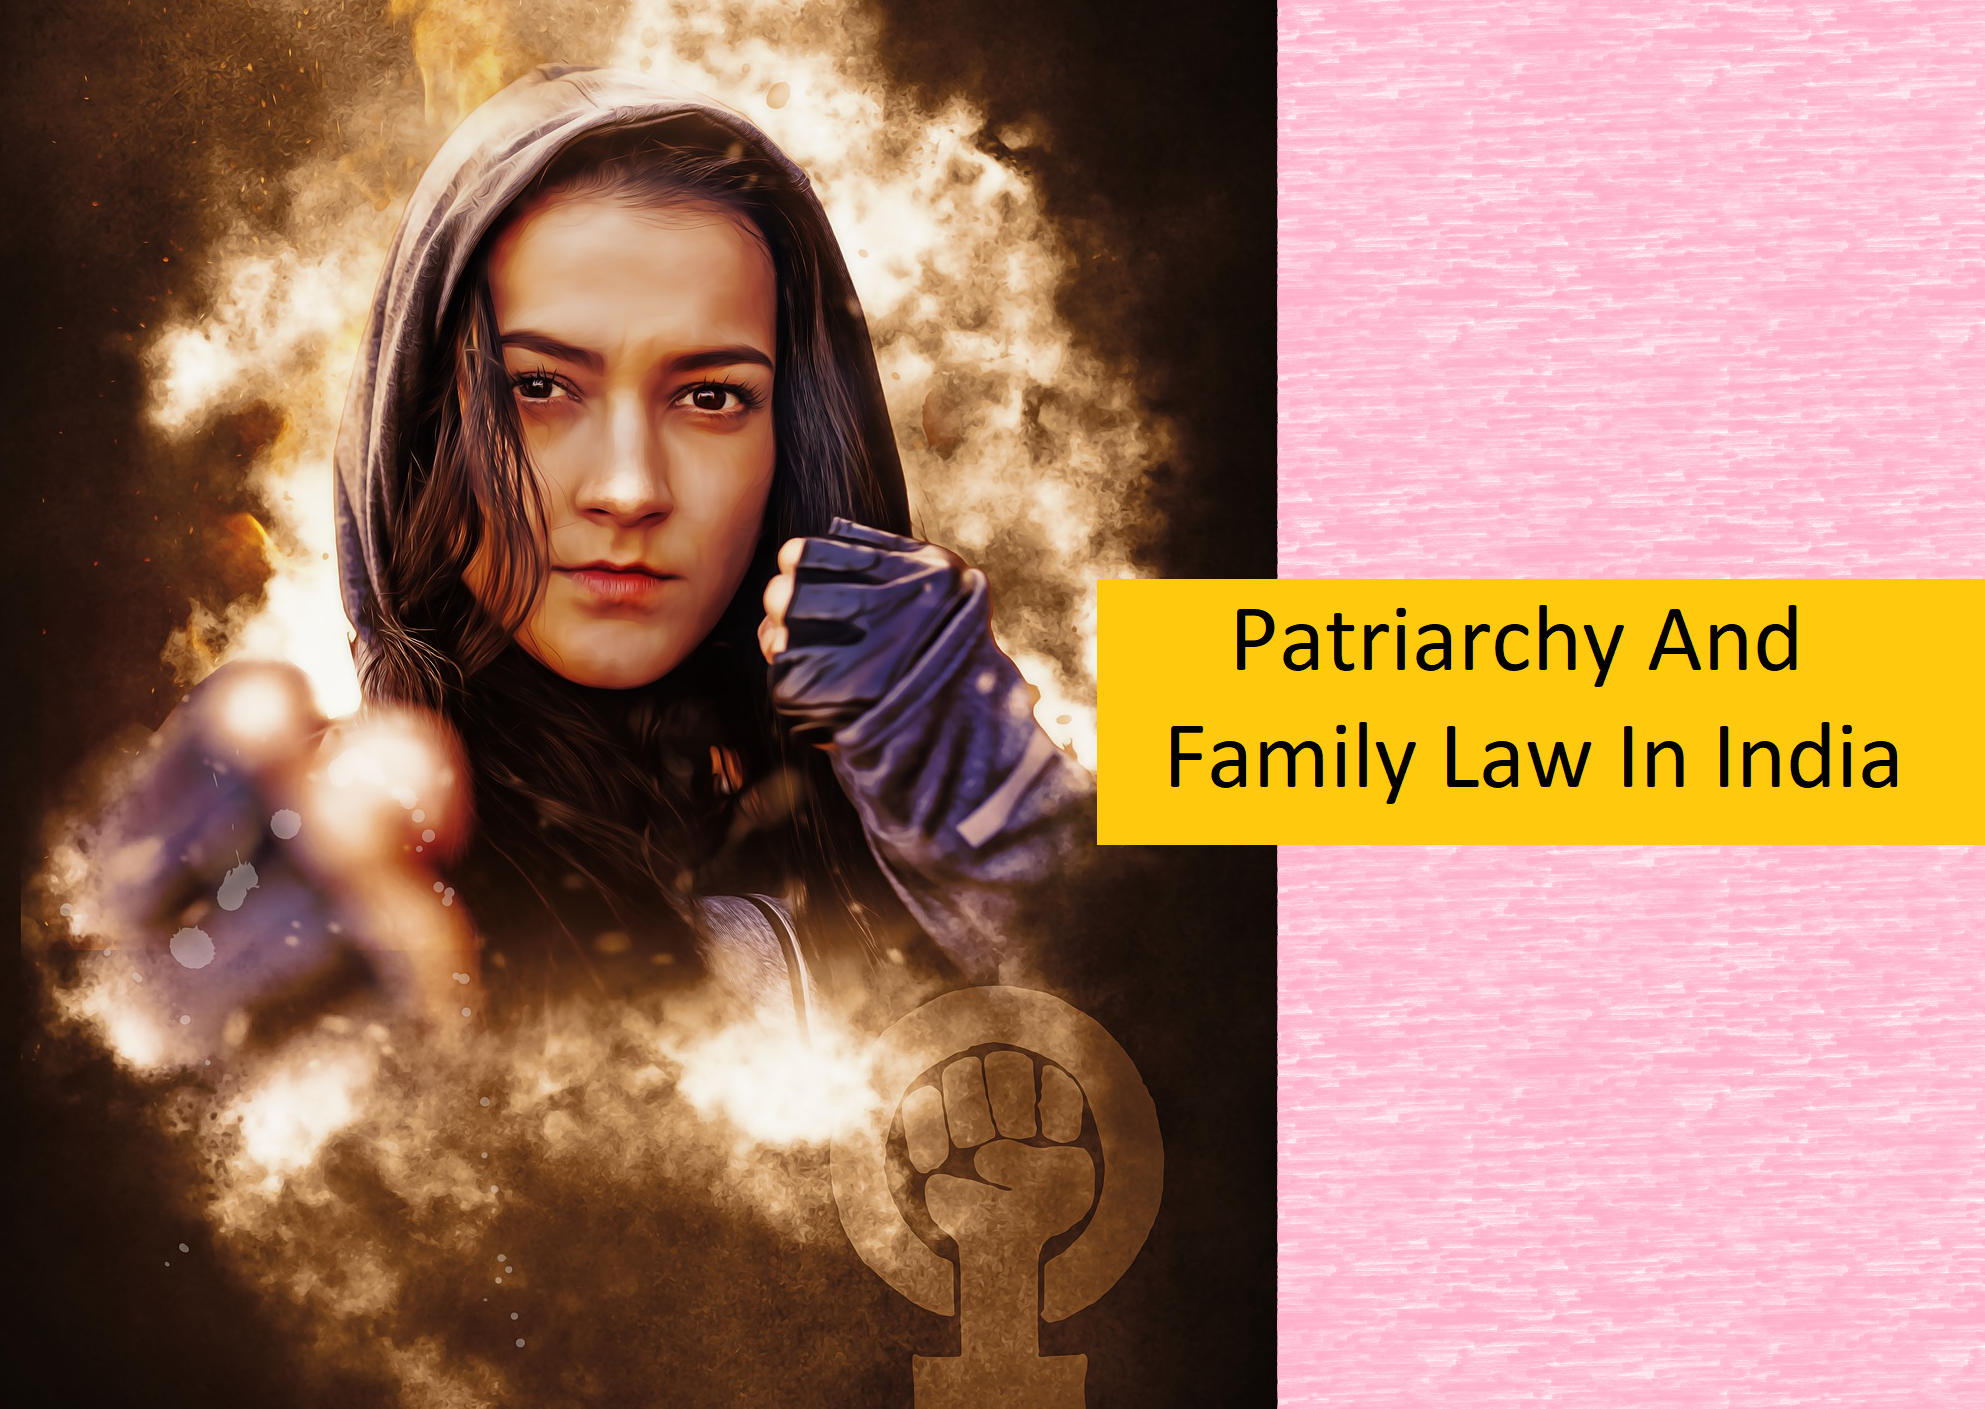 Patriarchy And Family Law In India: A Transition